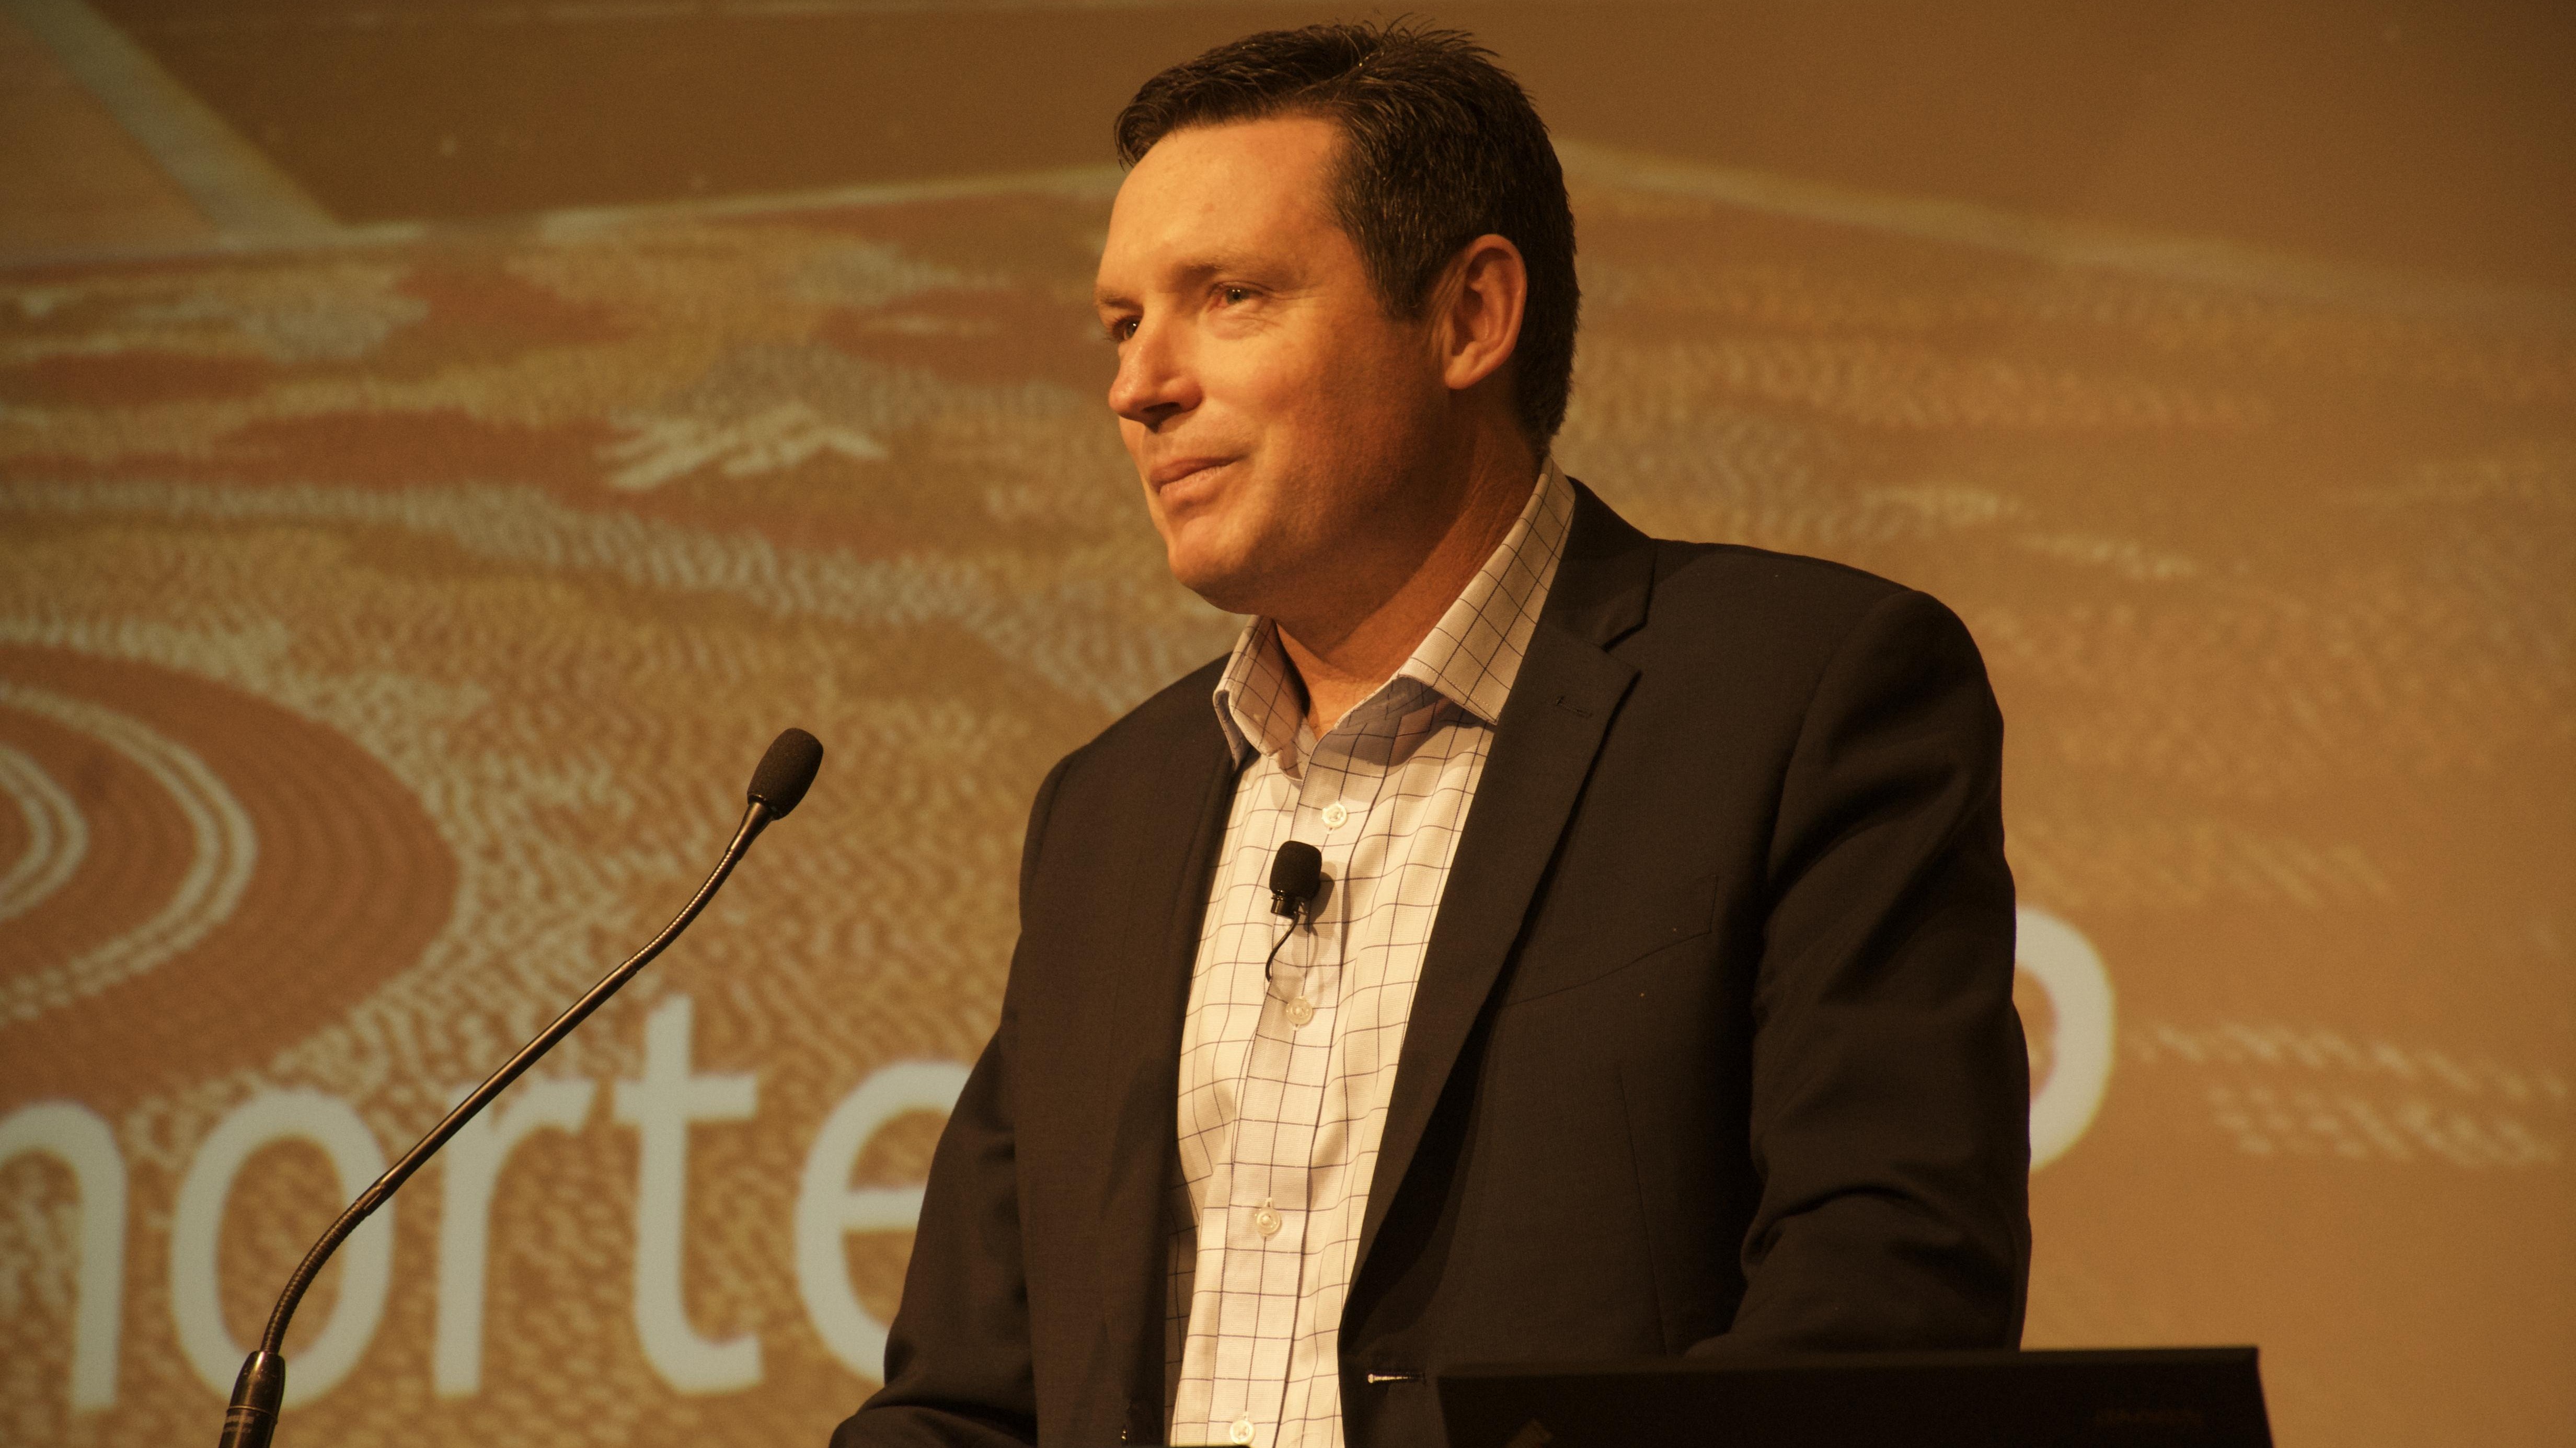 Lyle Shelton lashes out at SodaStream for supporting the LGBTI community